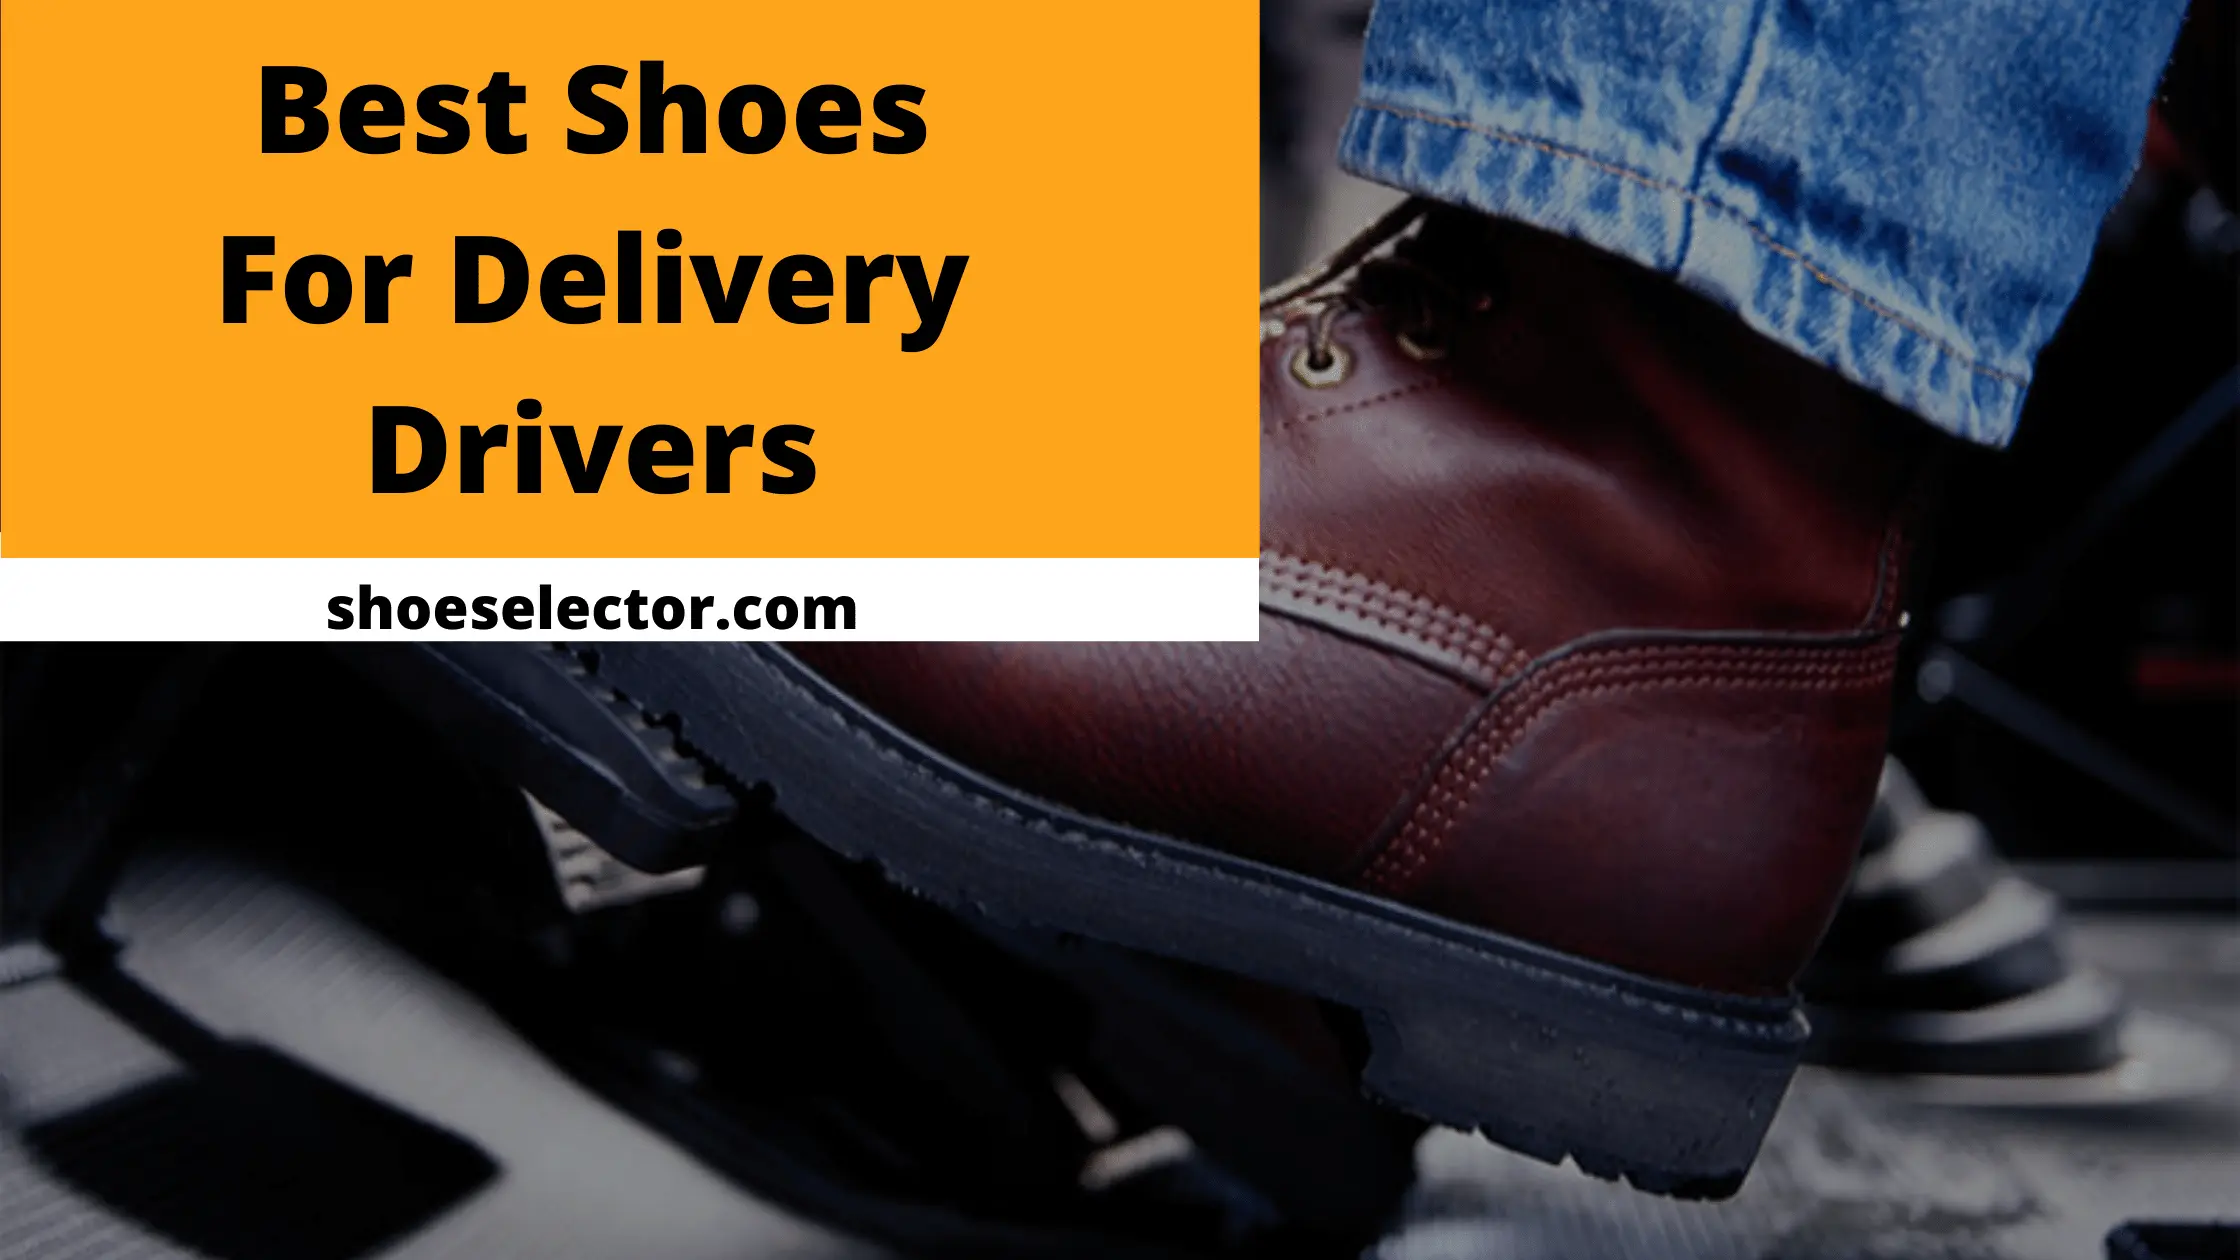 Best Shoes For Delivery Drivers - Top Expert's Choice